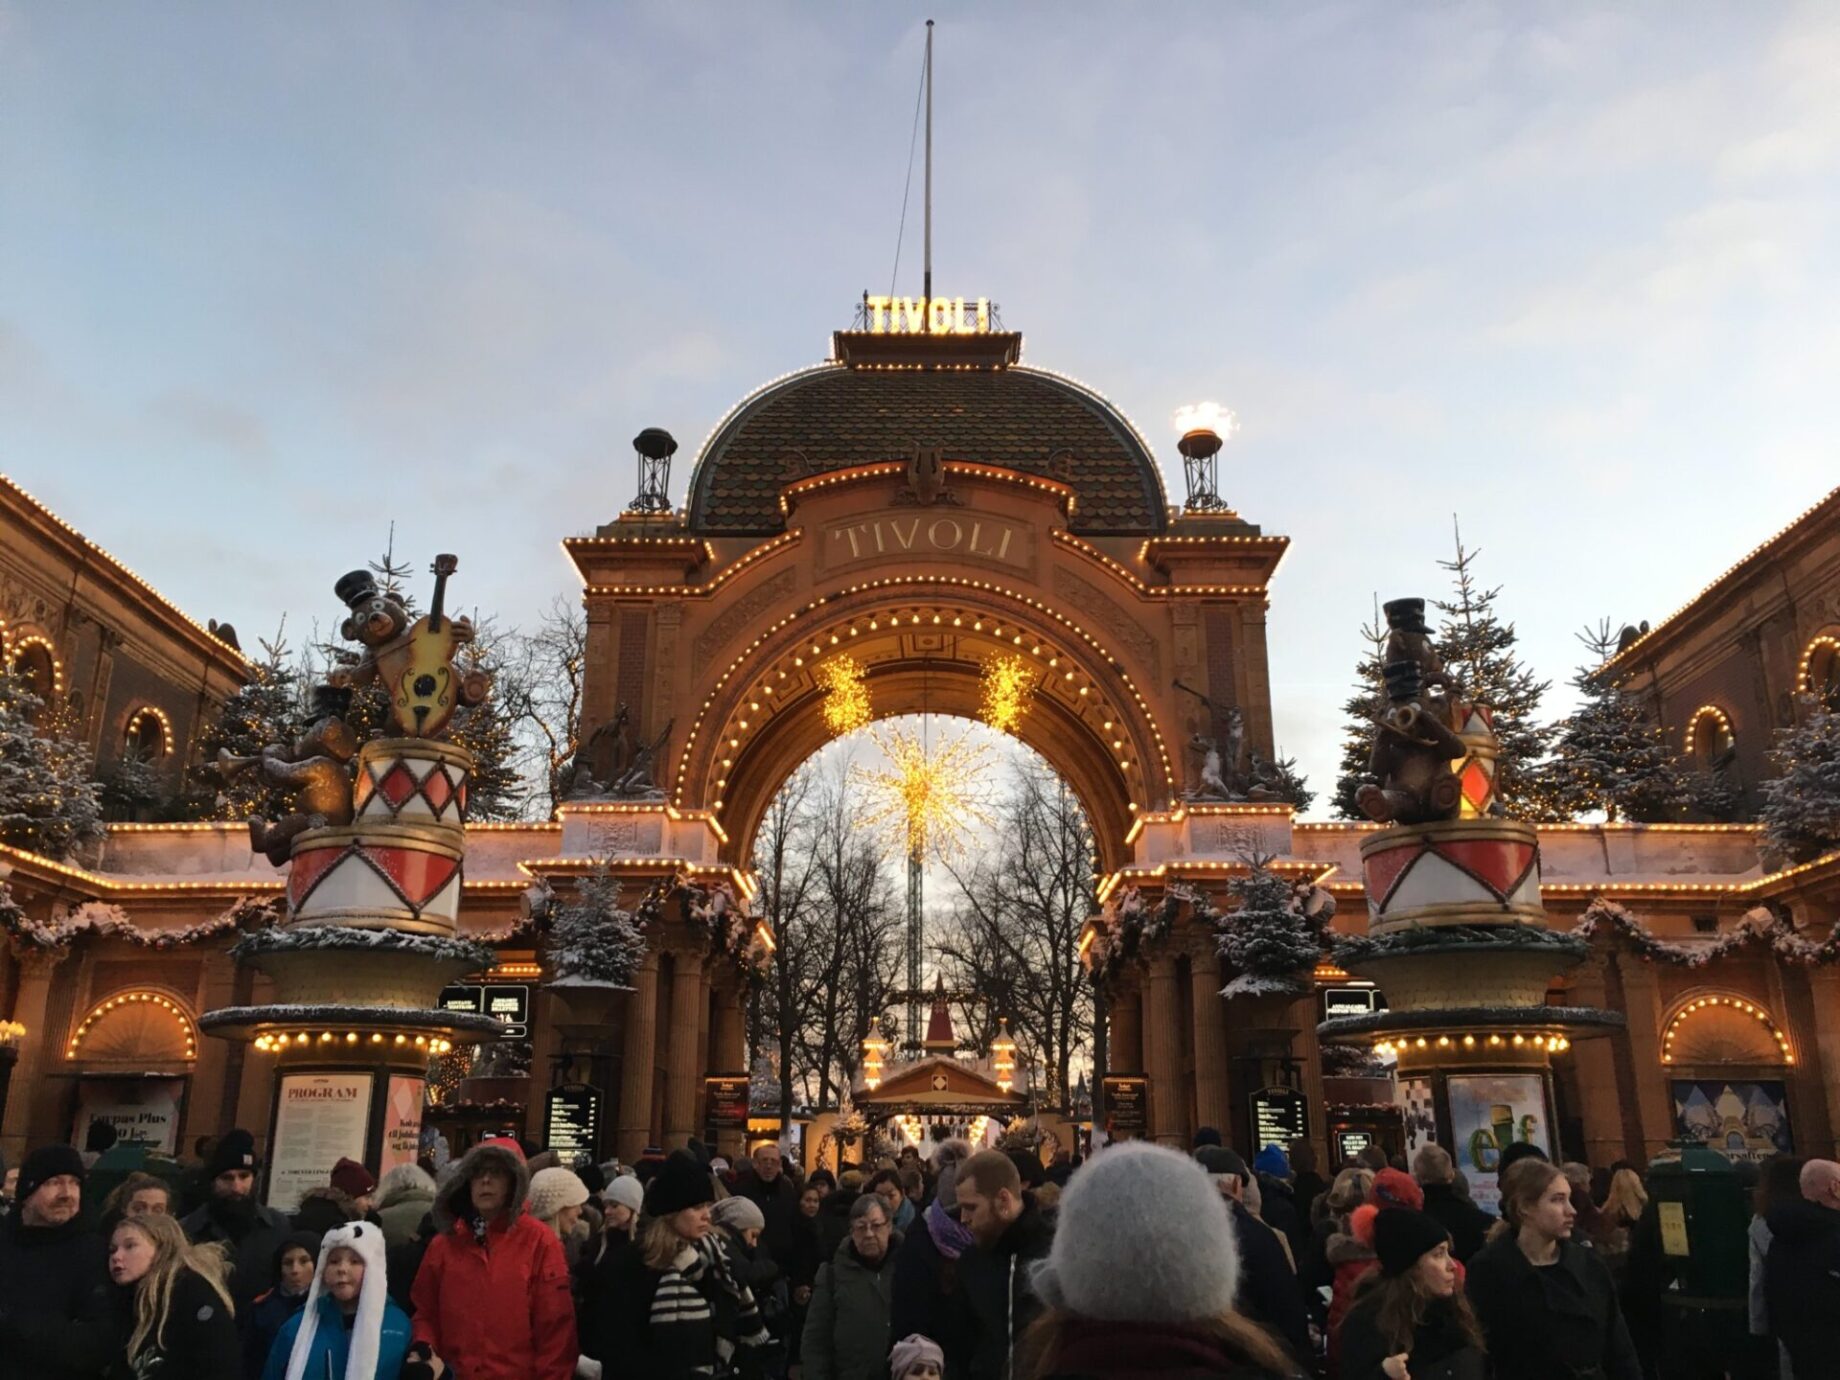 a crowd in front of the Tivoli amusement park in Stockholm